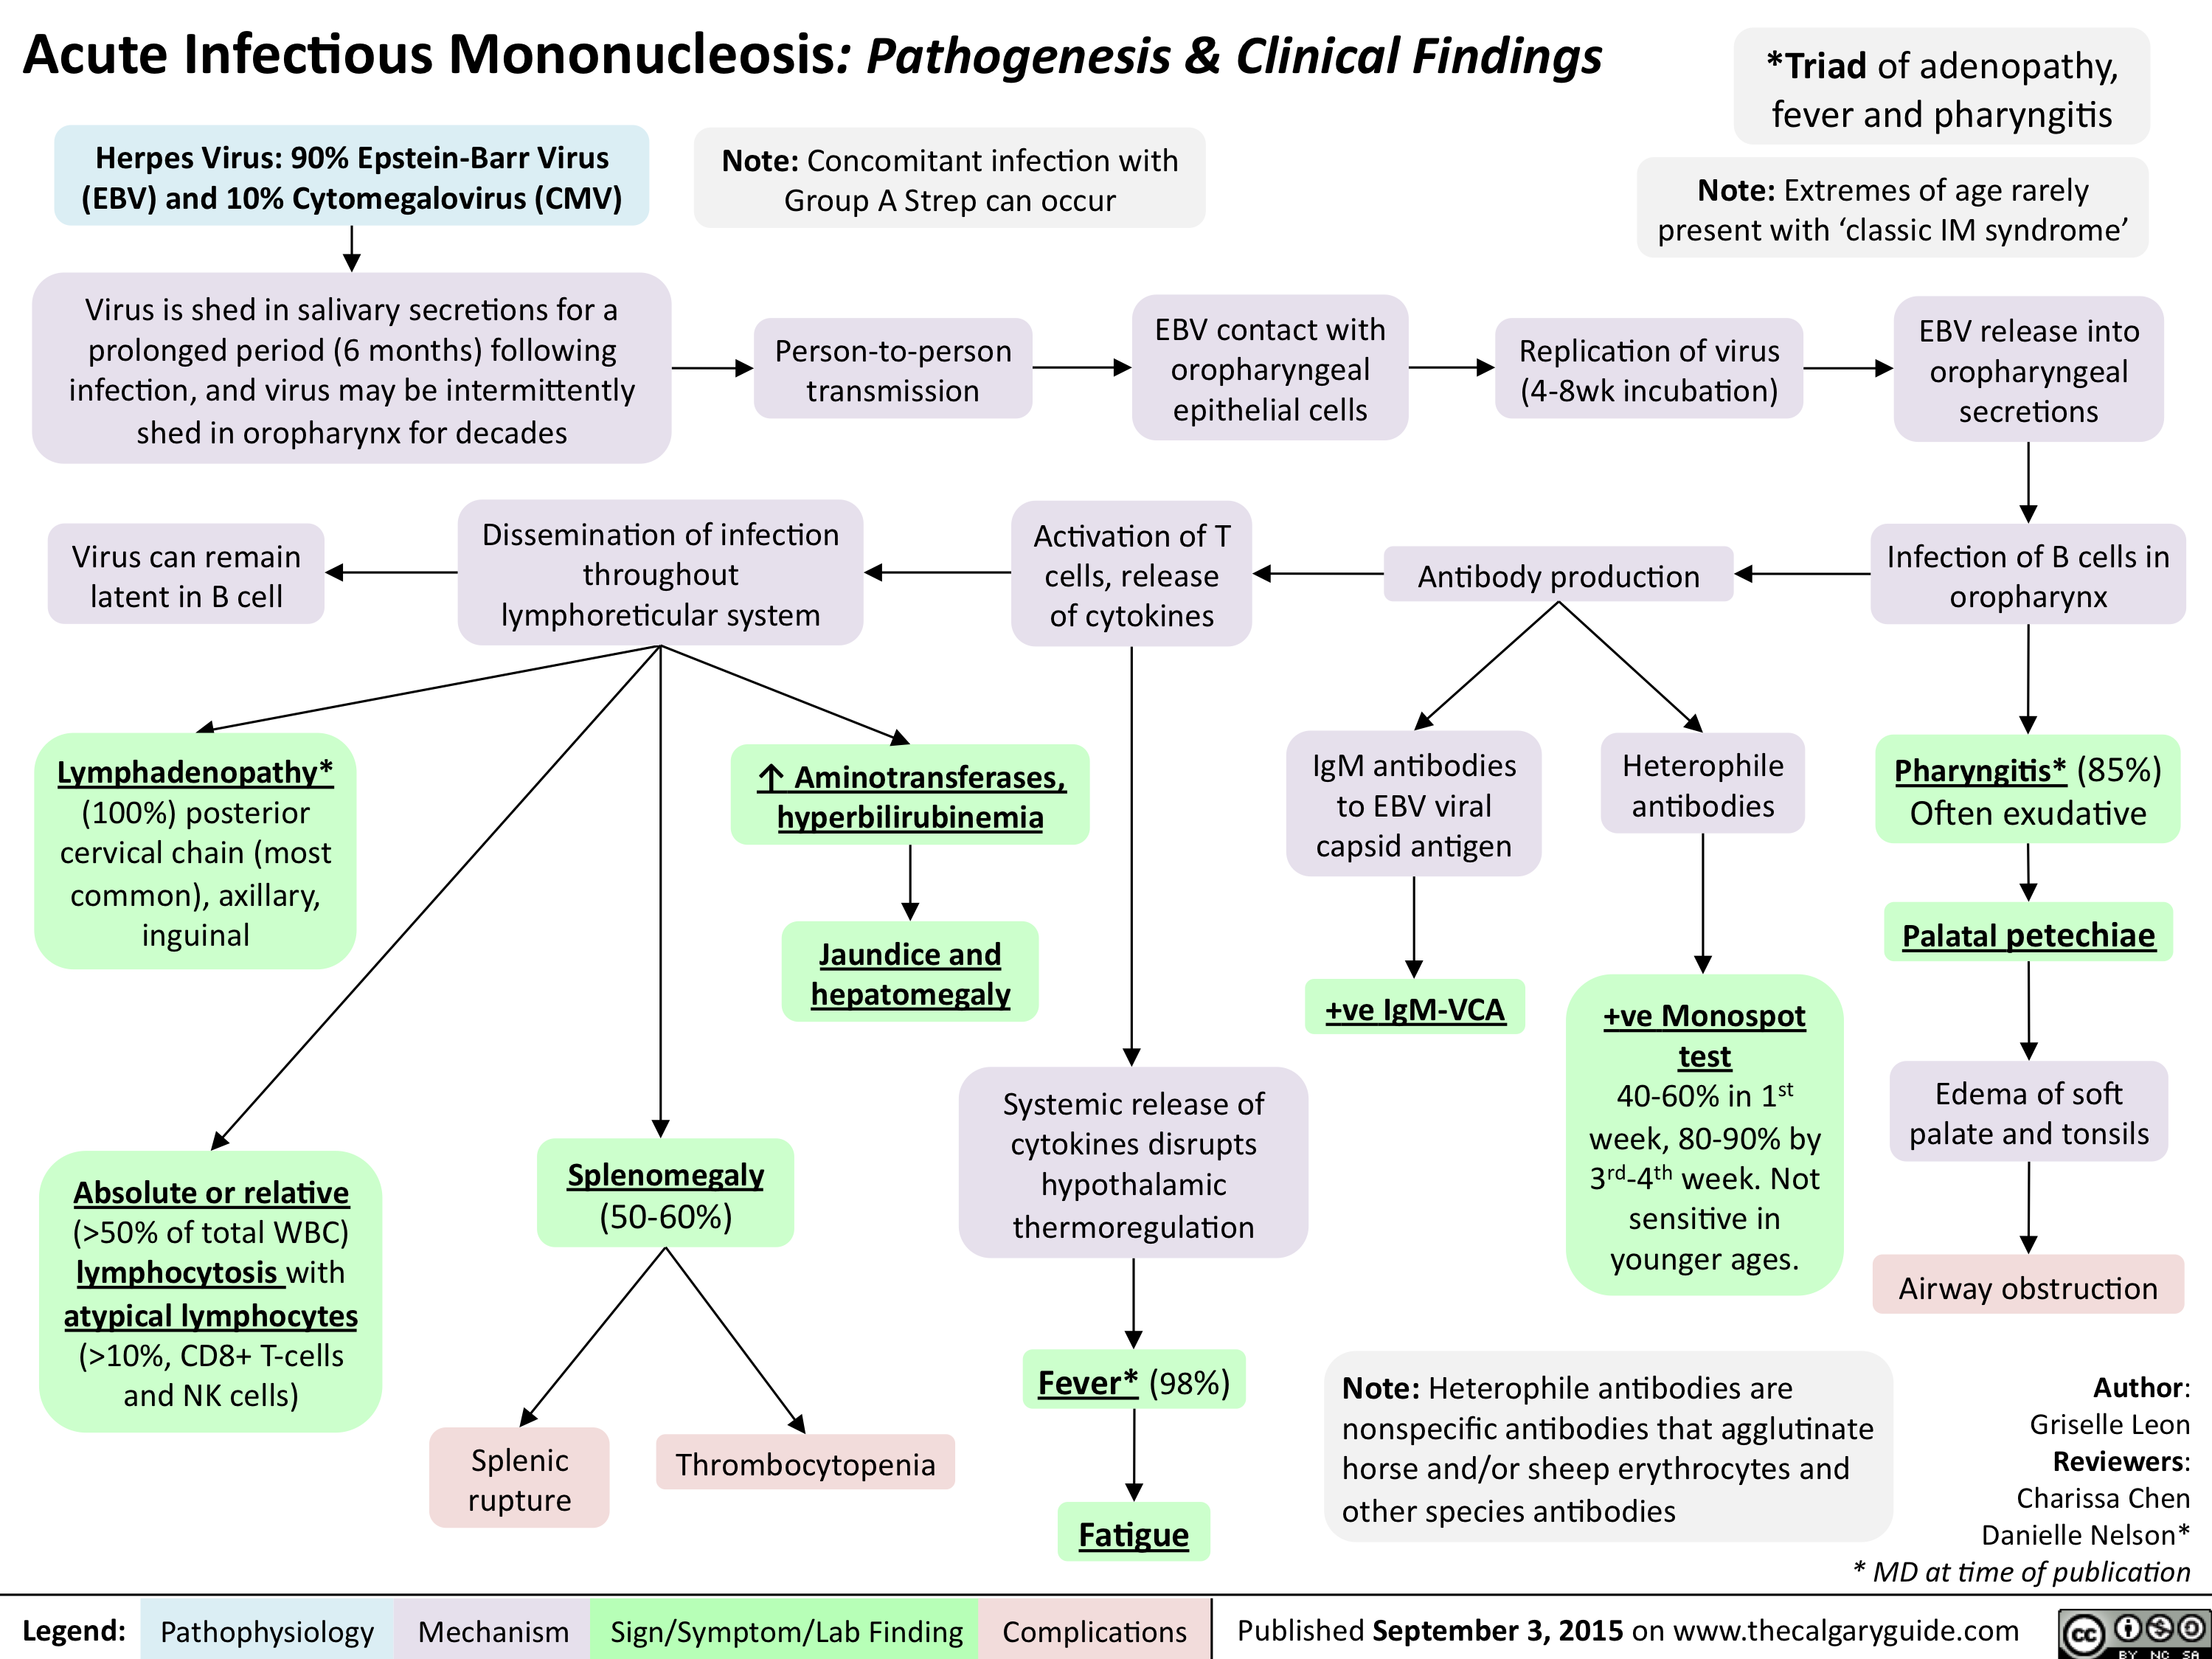 Acute Infectious Mononucleosis-Pathogenesis and clinical findings